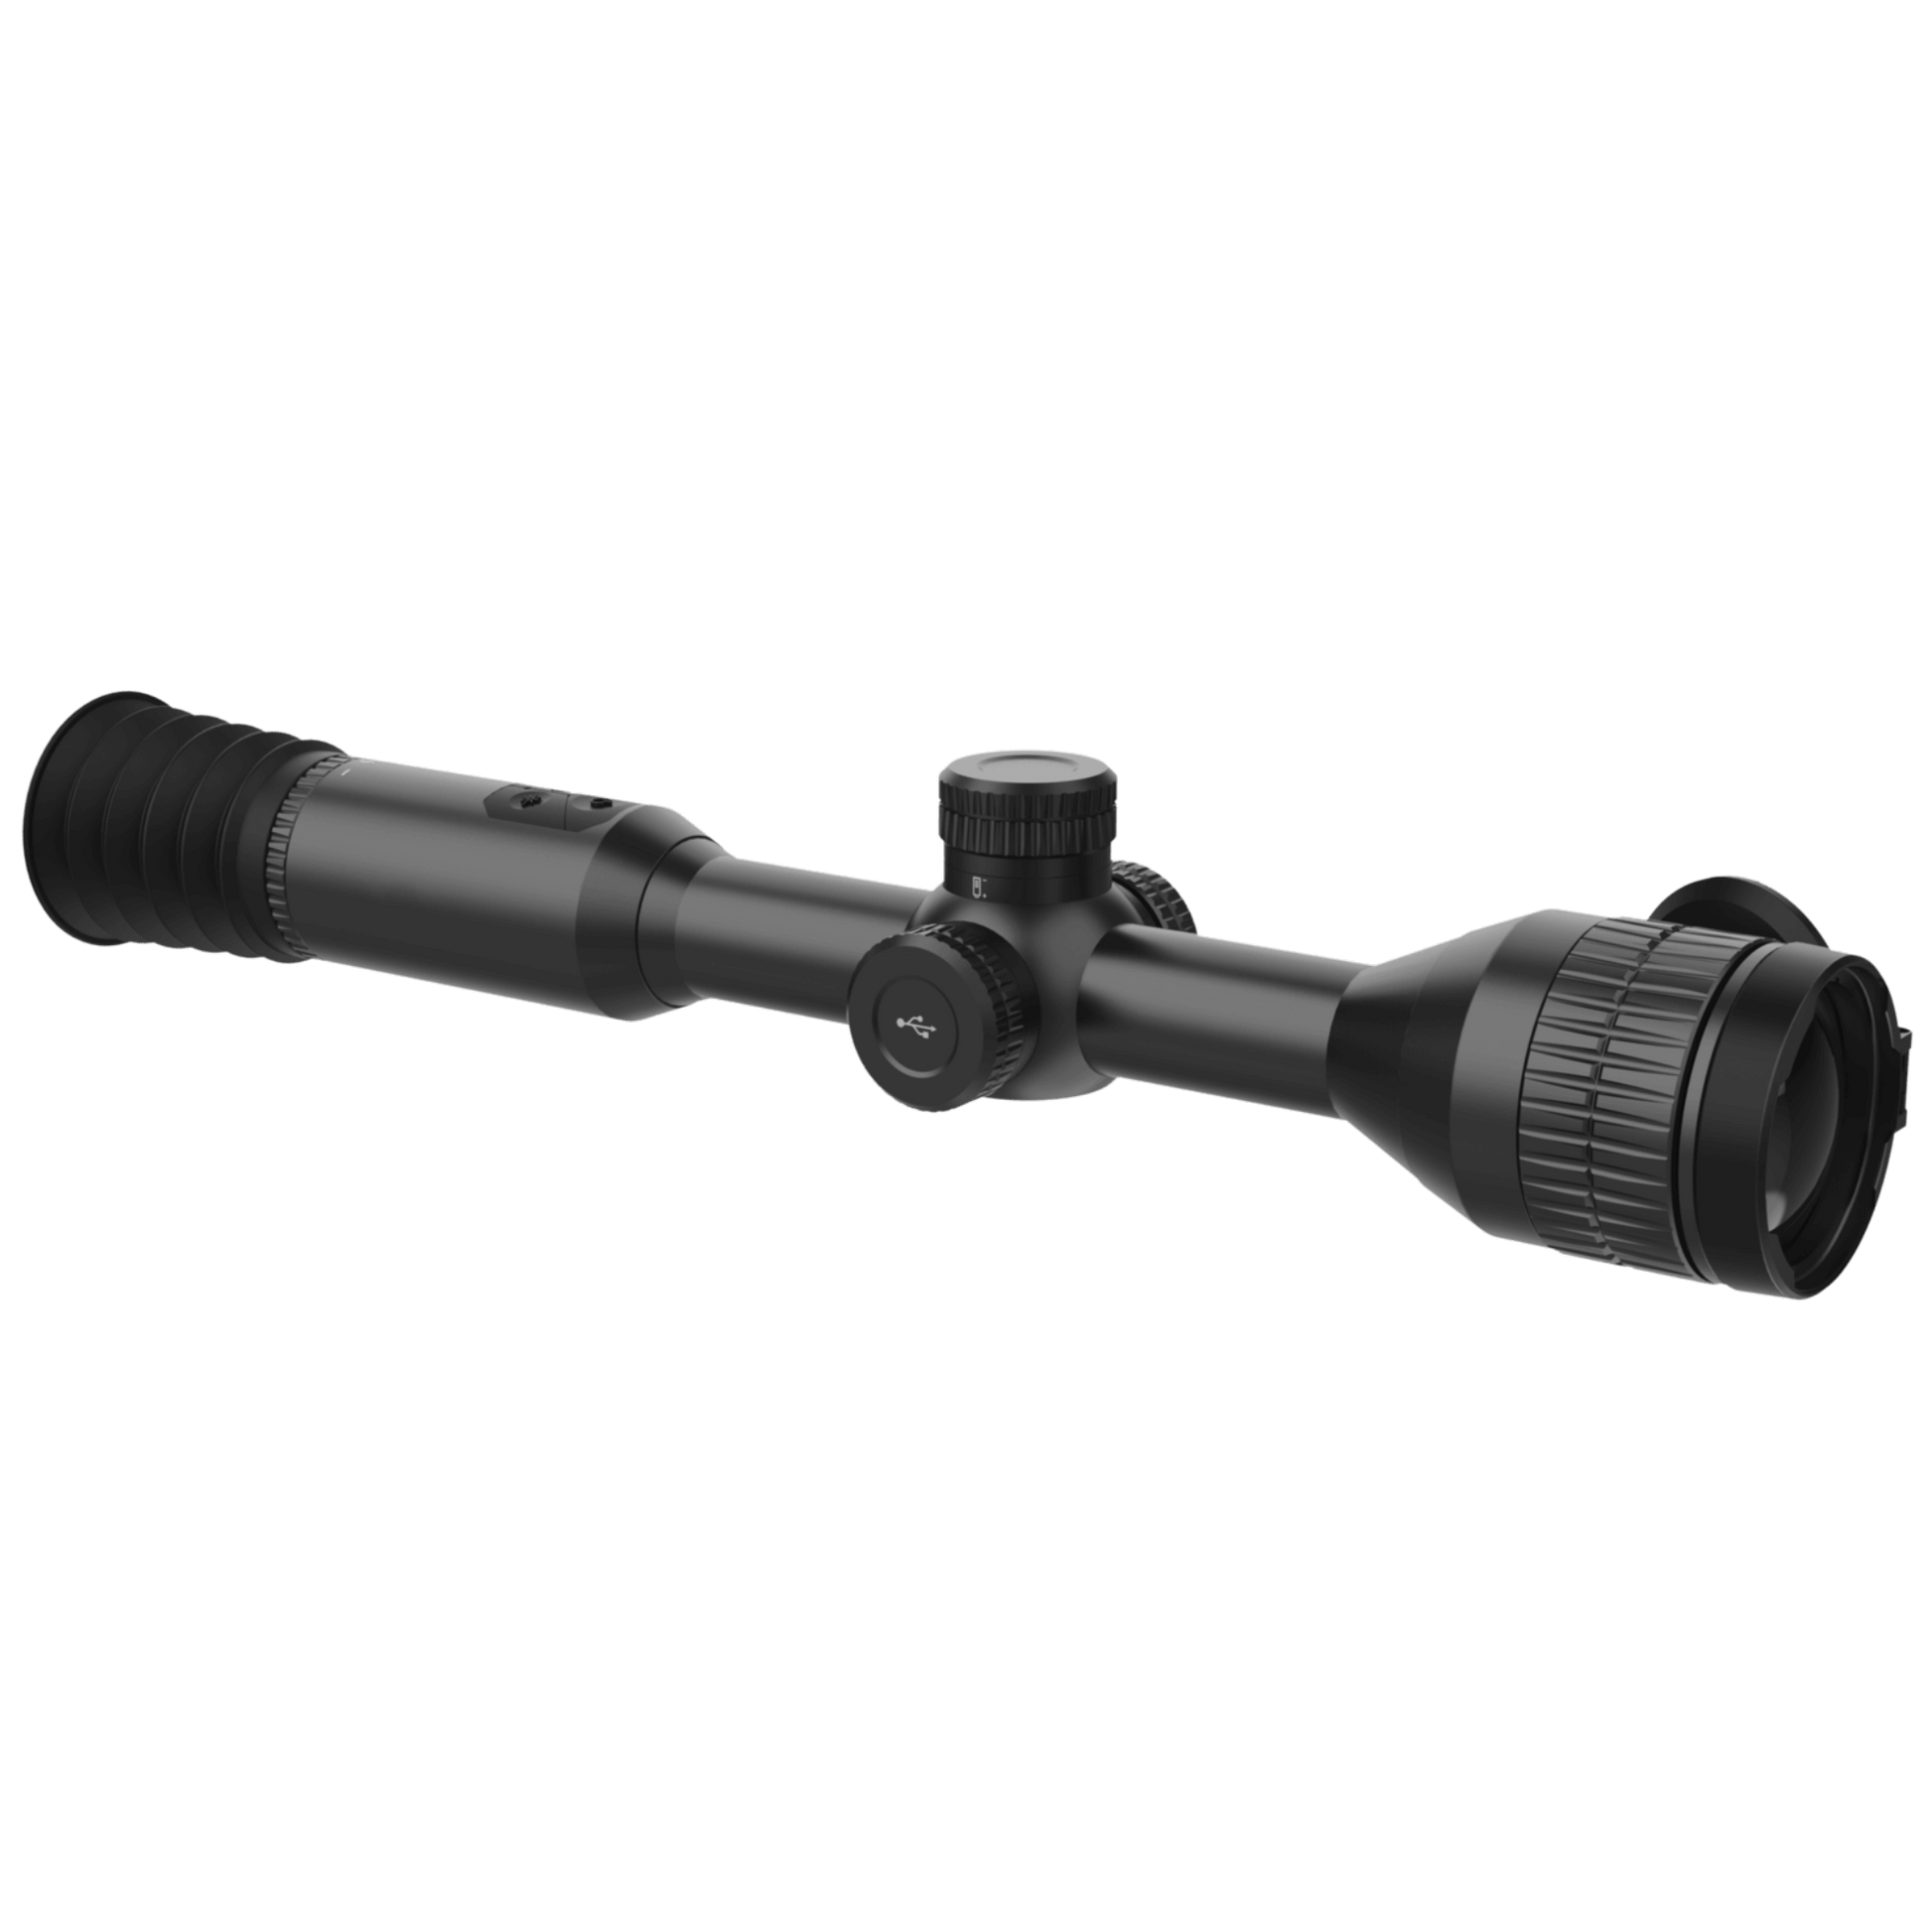 HikMicro Steller SH50 Thermal Imaging Scope Right Side View